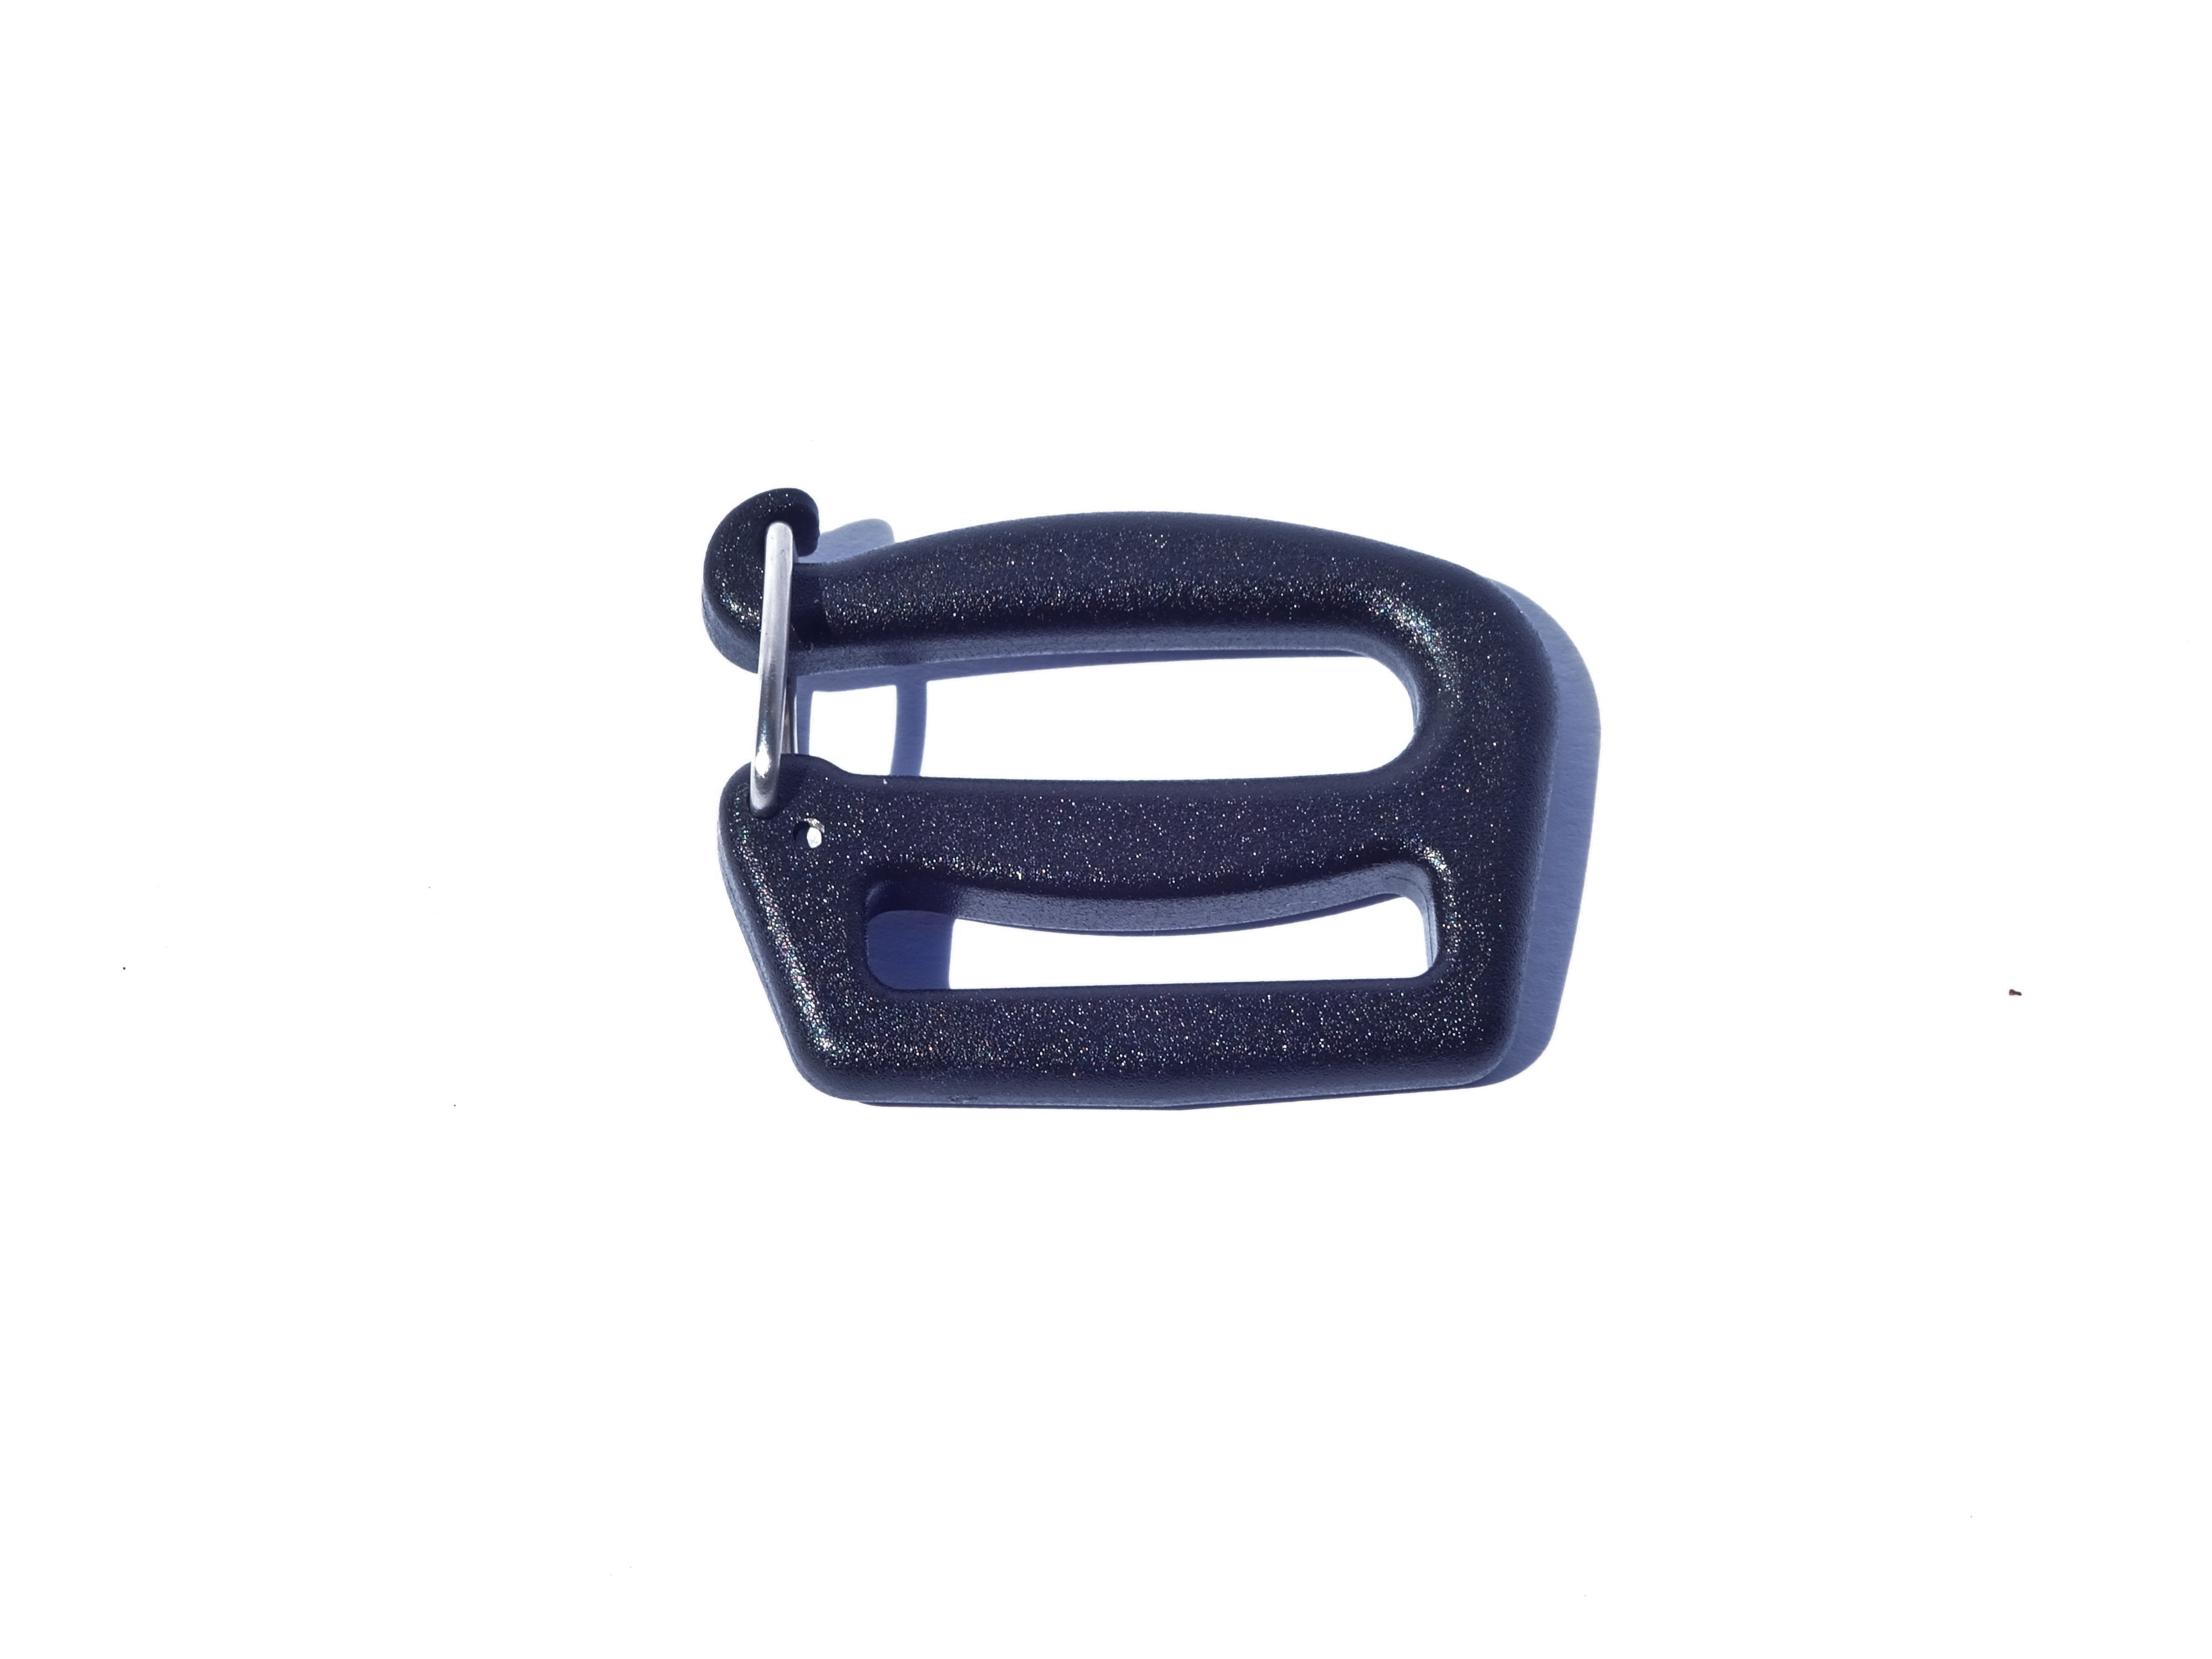 Fashionable recycled plastic buckle from Leading Suppliers 